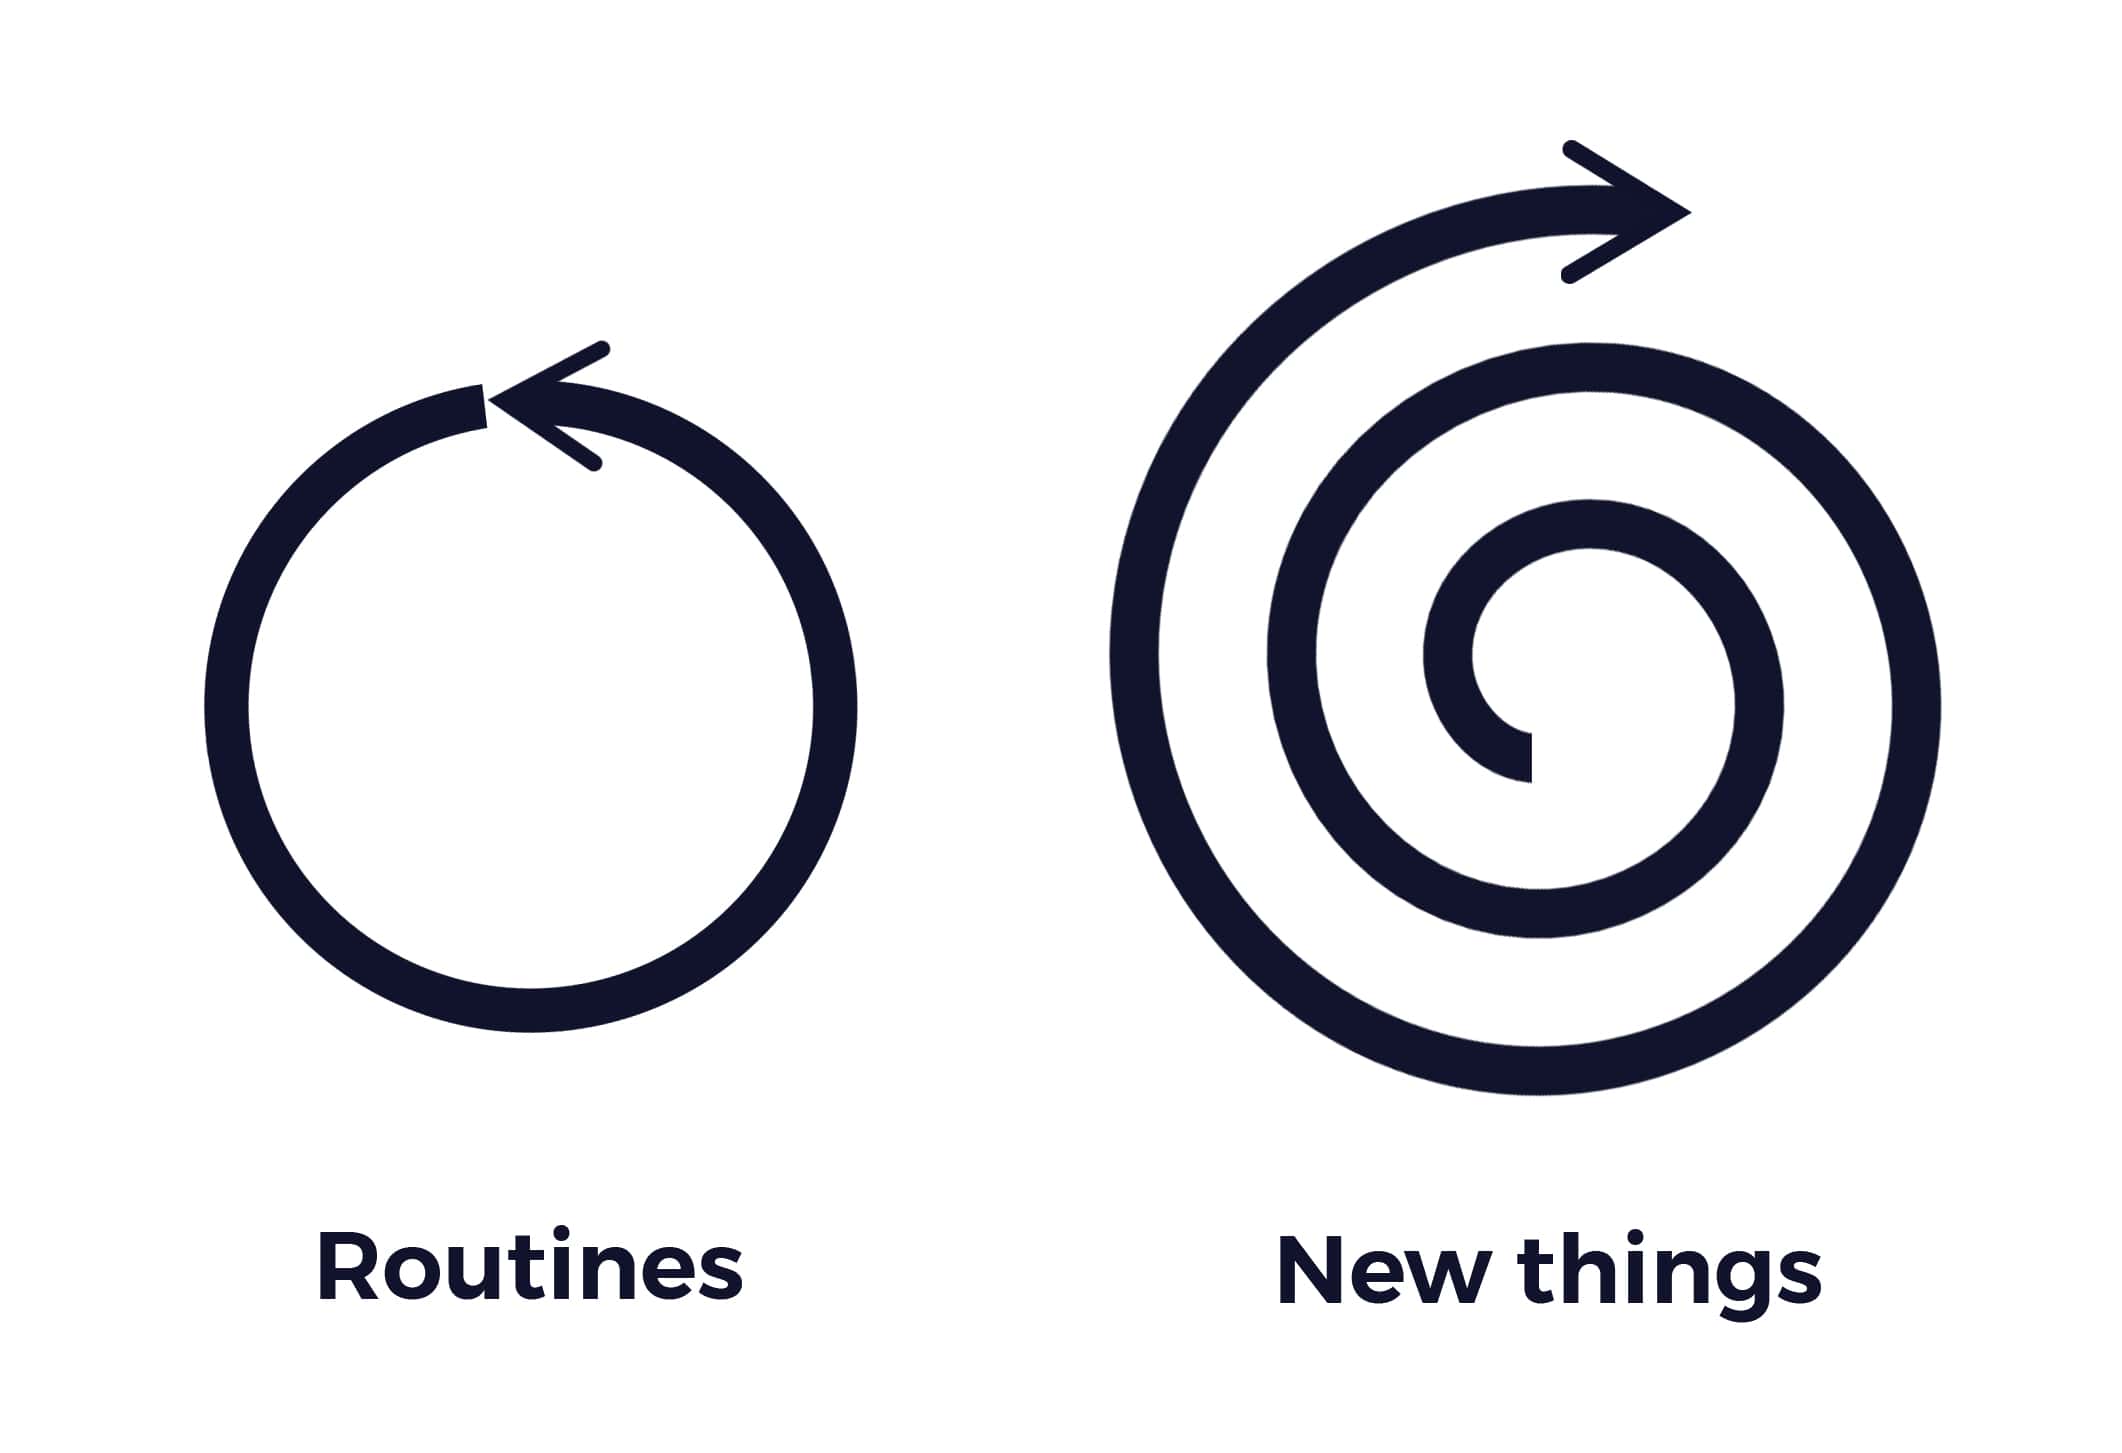 Routines and new things